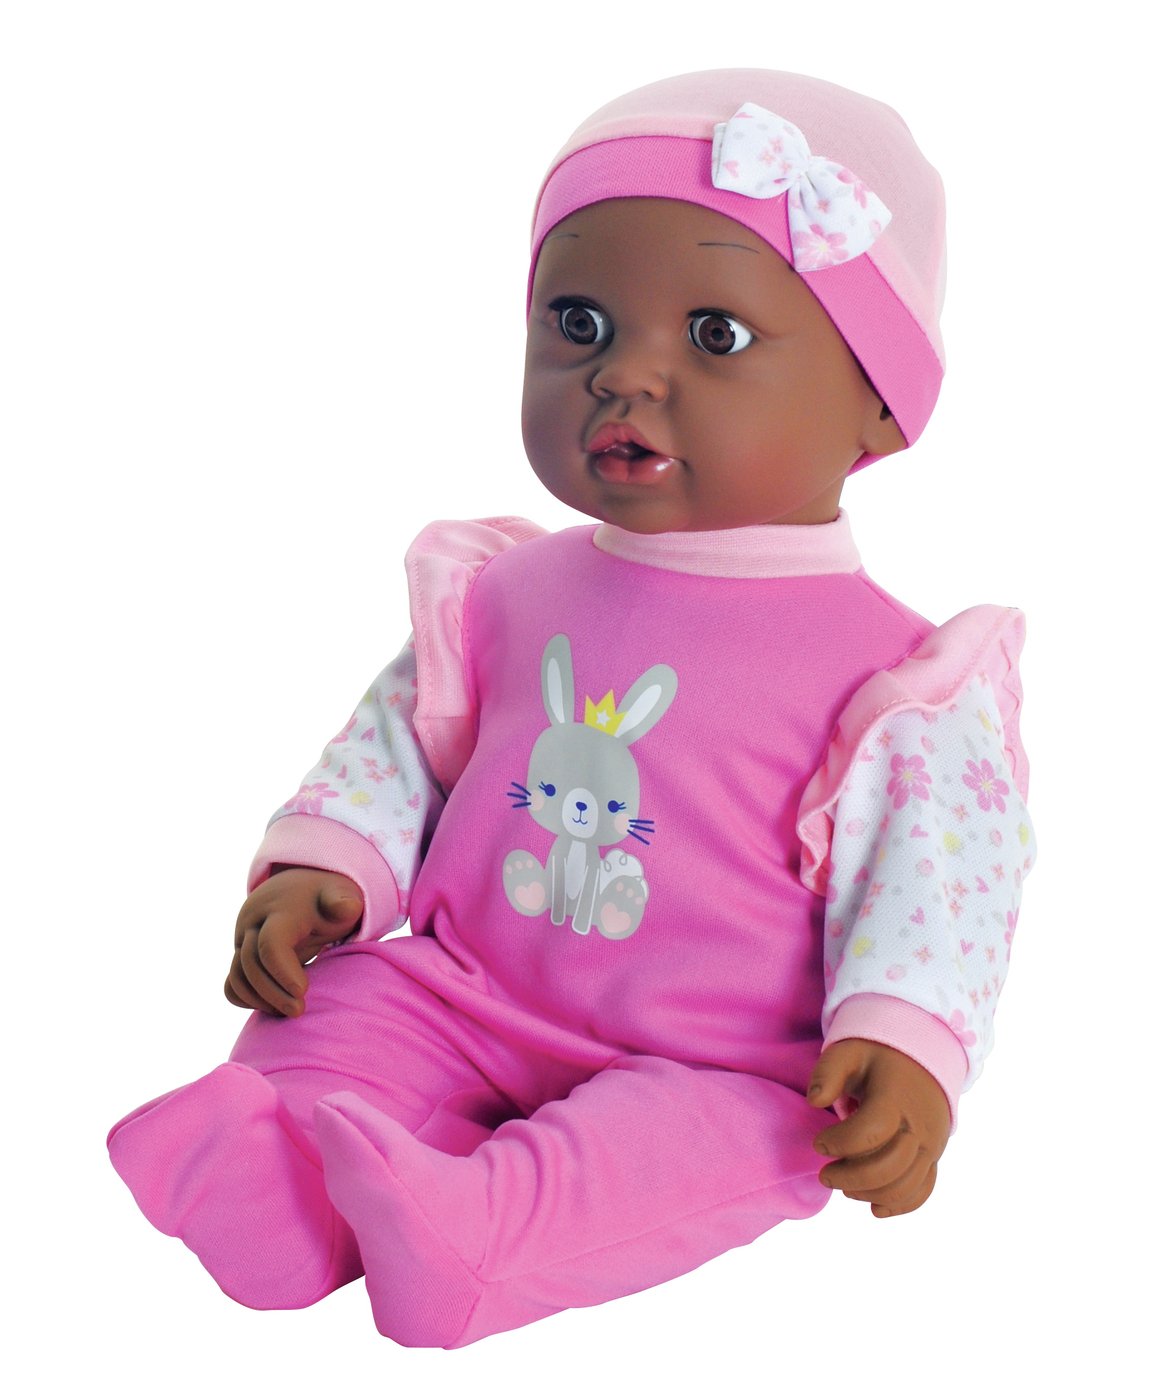 Chad Valley Babies To Love Cuddly Mia Doll Review Toy Reviews